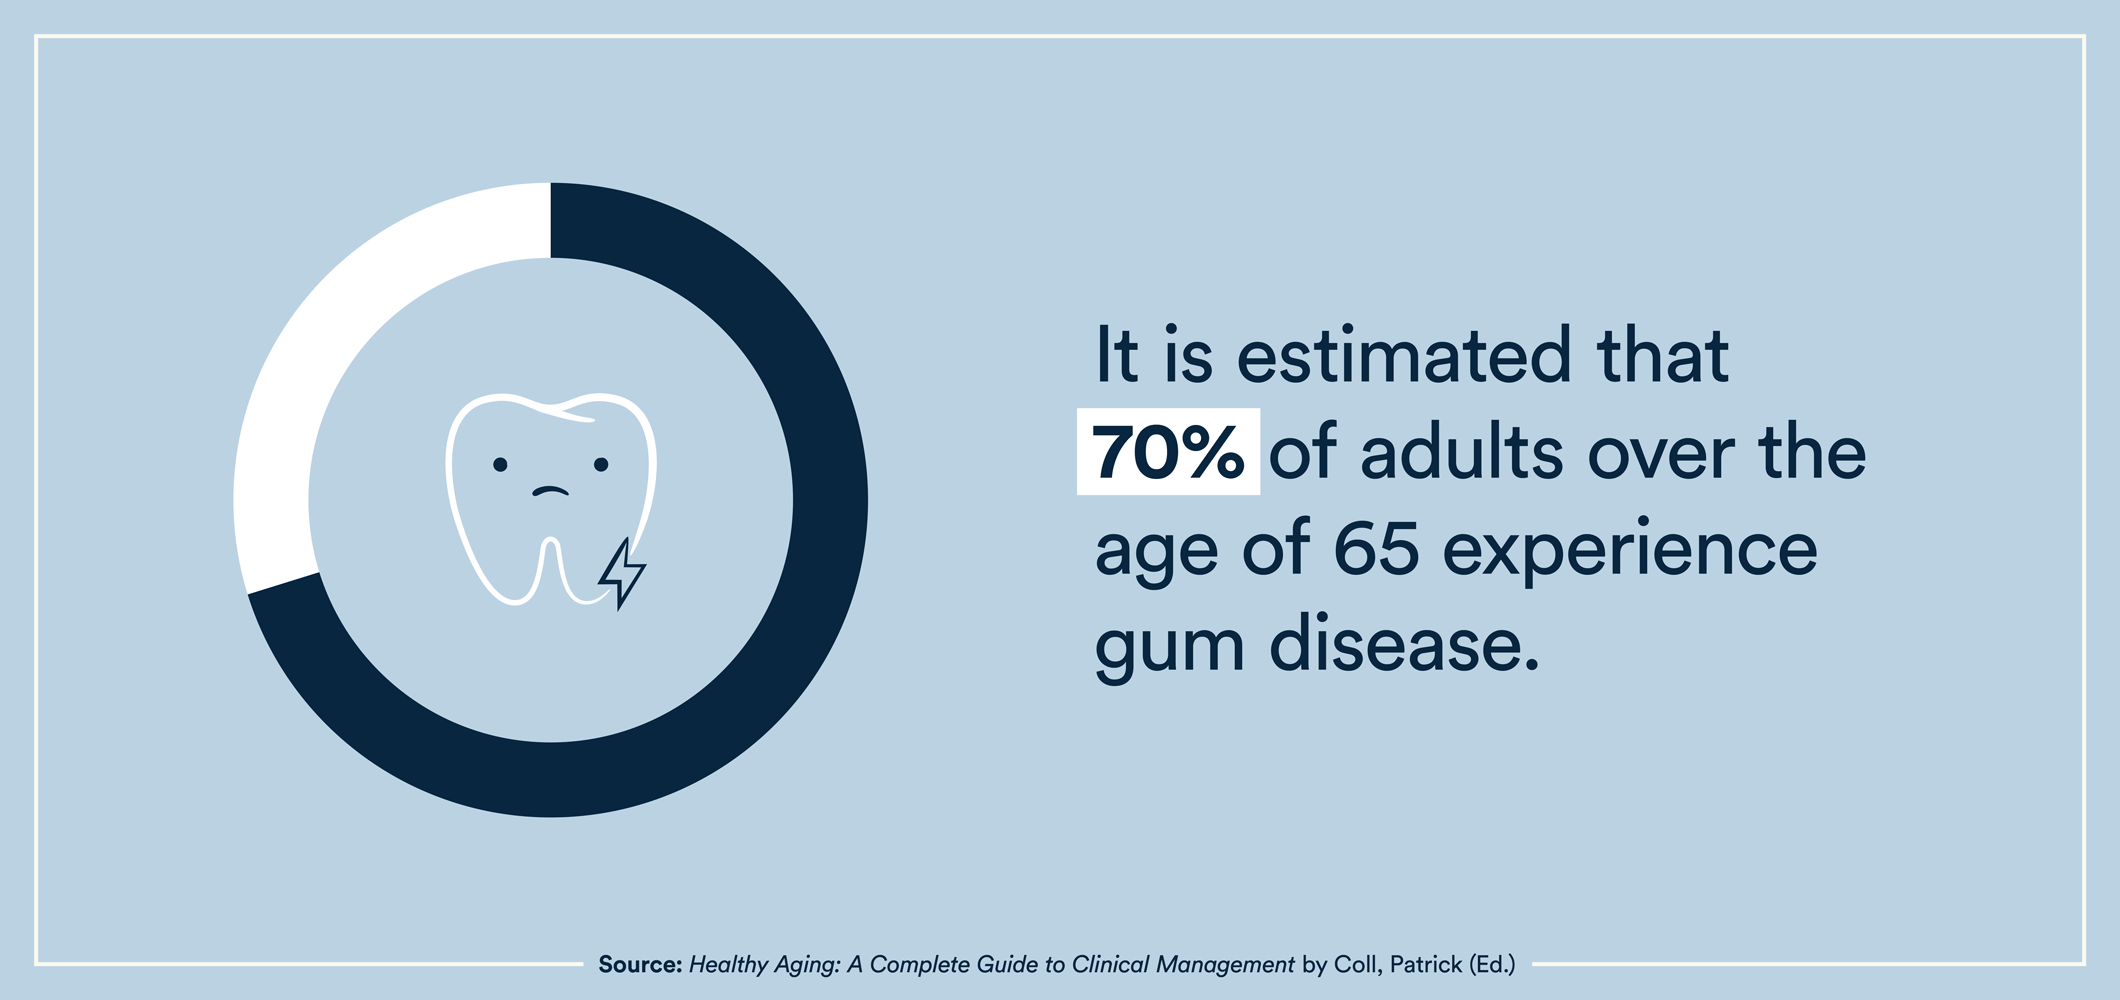 It's estimated that 70% of adults over the age of 65 experience gum disease. 